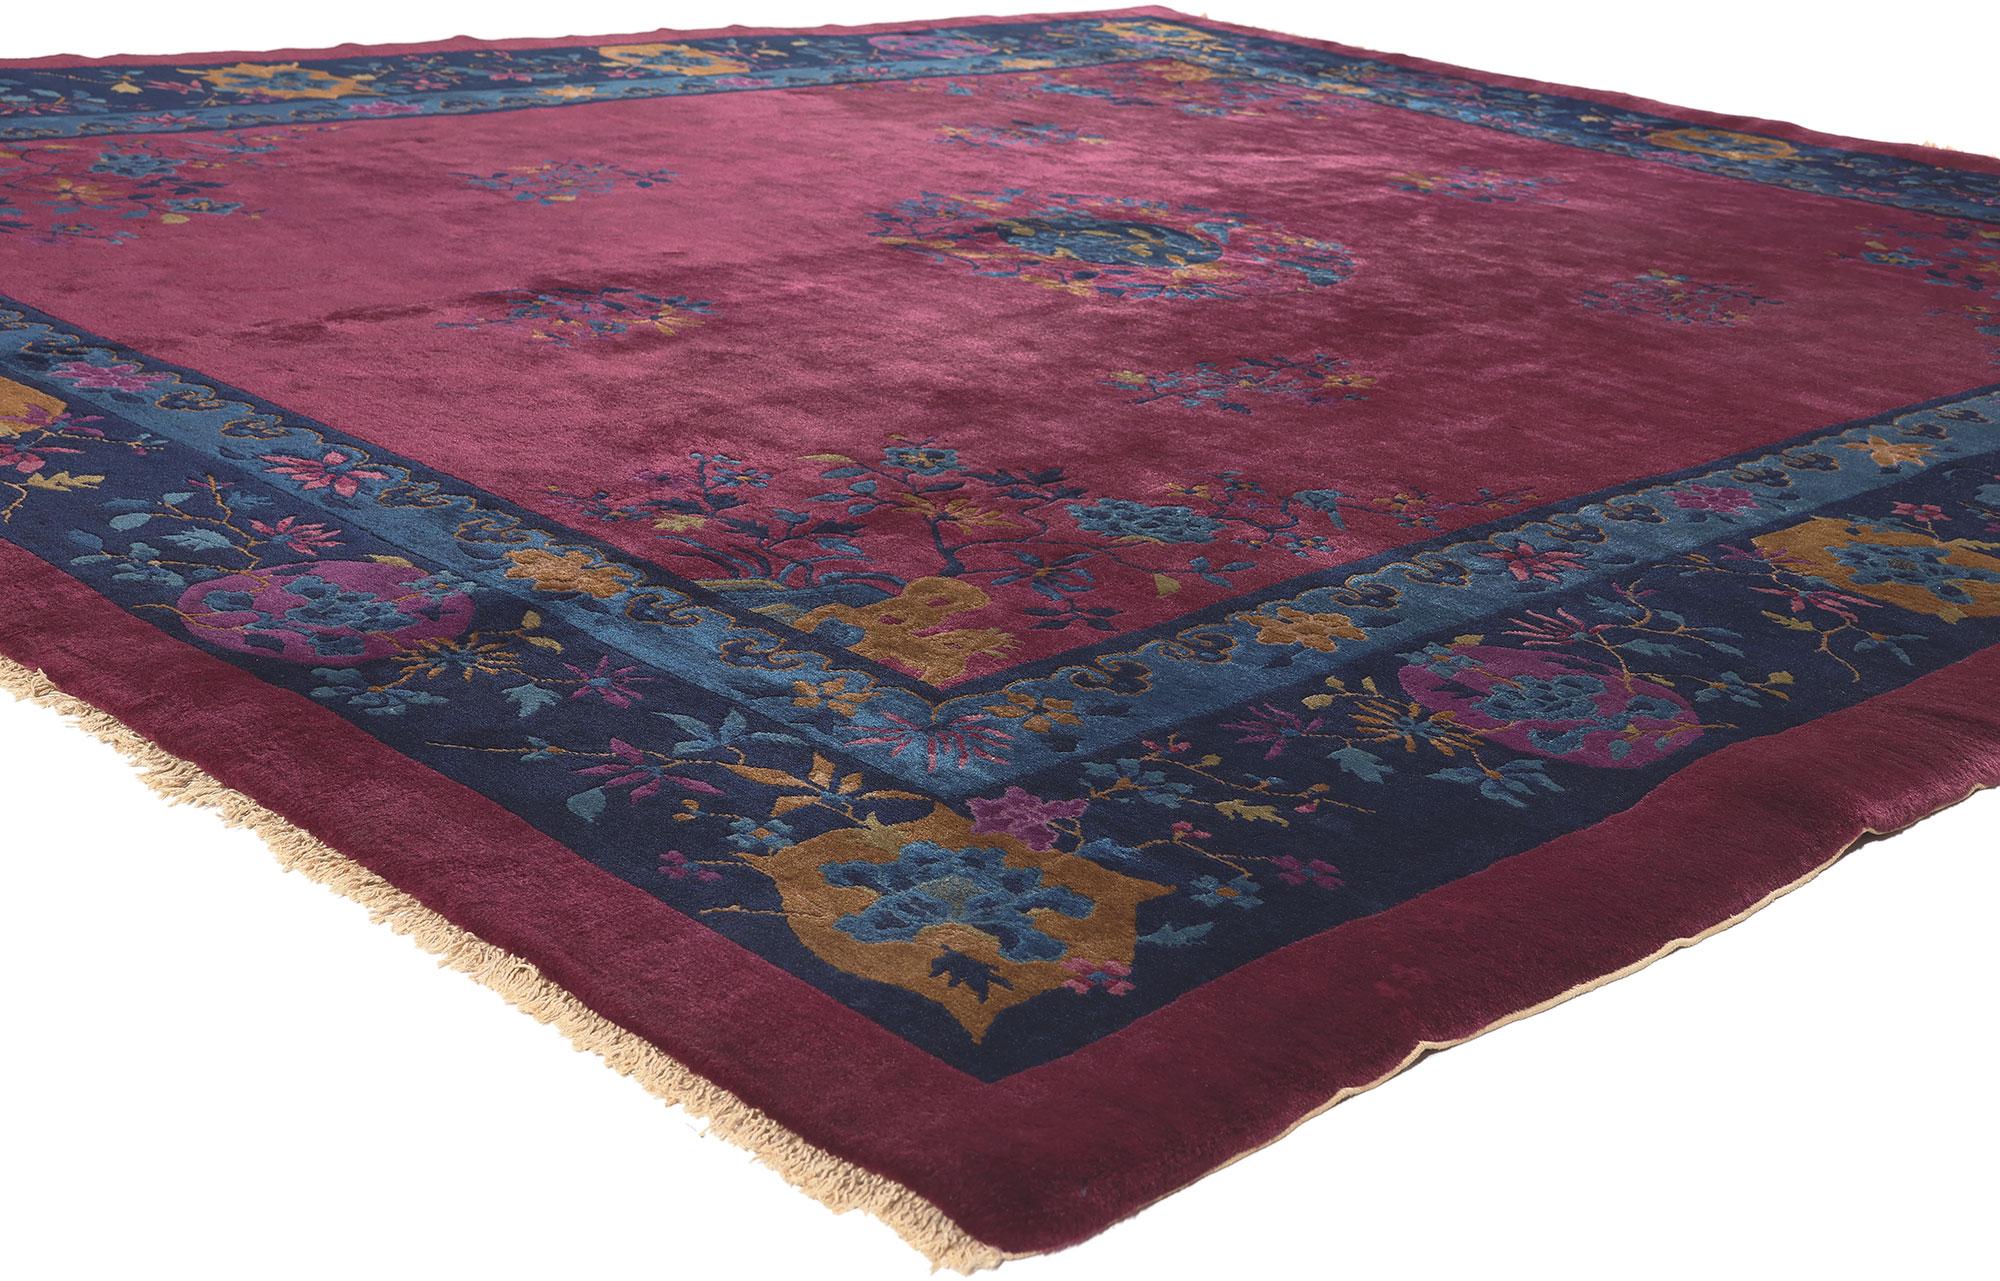 77189 Antique Chinese Art Deco Rug, 08'02 x 09'05.
Maximalist style meets sensual decadence in this hand knotted wool antique Chinese Art Deco rug. The elaborate floral details and saturated jewel-tone colors woven into this piece work together